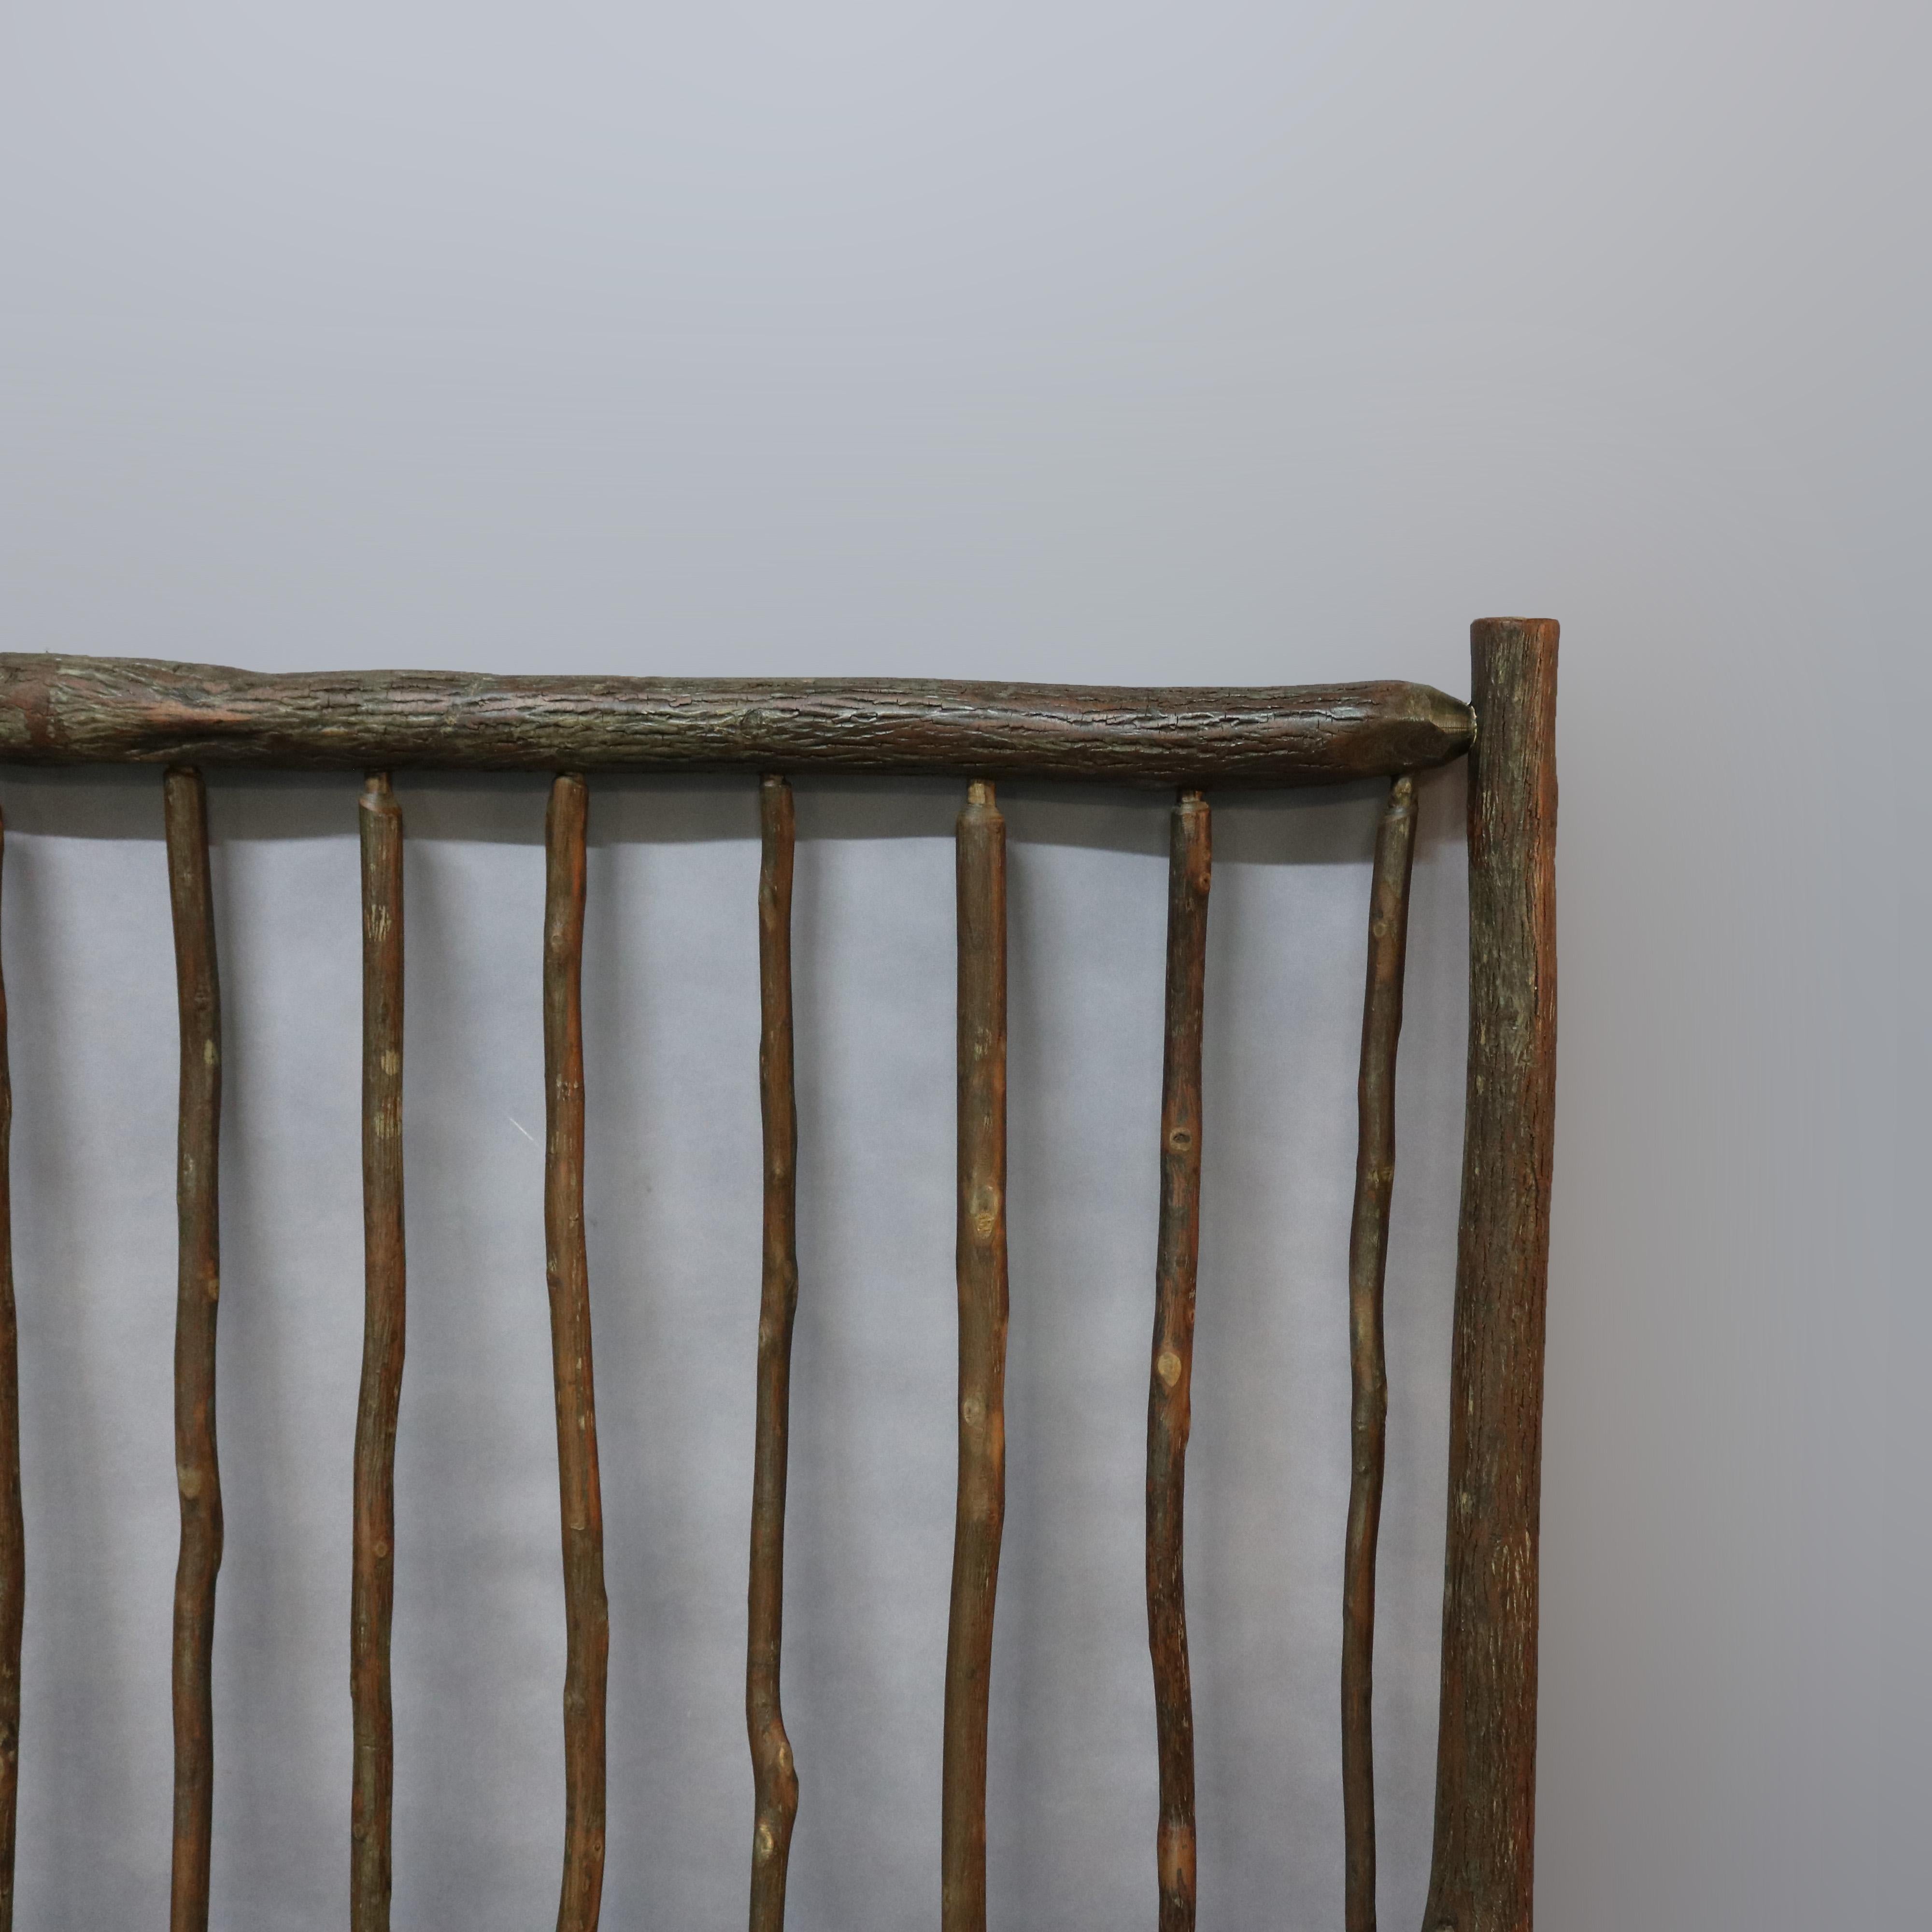 An antique rustic Adirondack queen size headboard in the manner of Old Hickory offers stick form construction, 20th century

Measures: 60